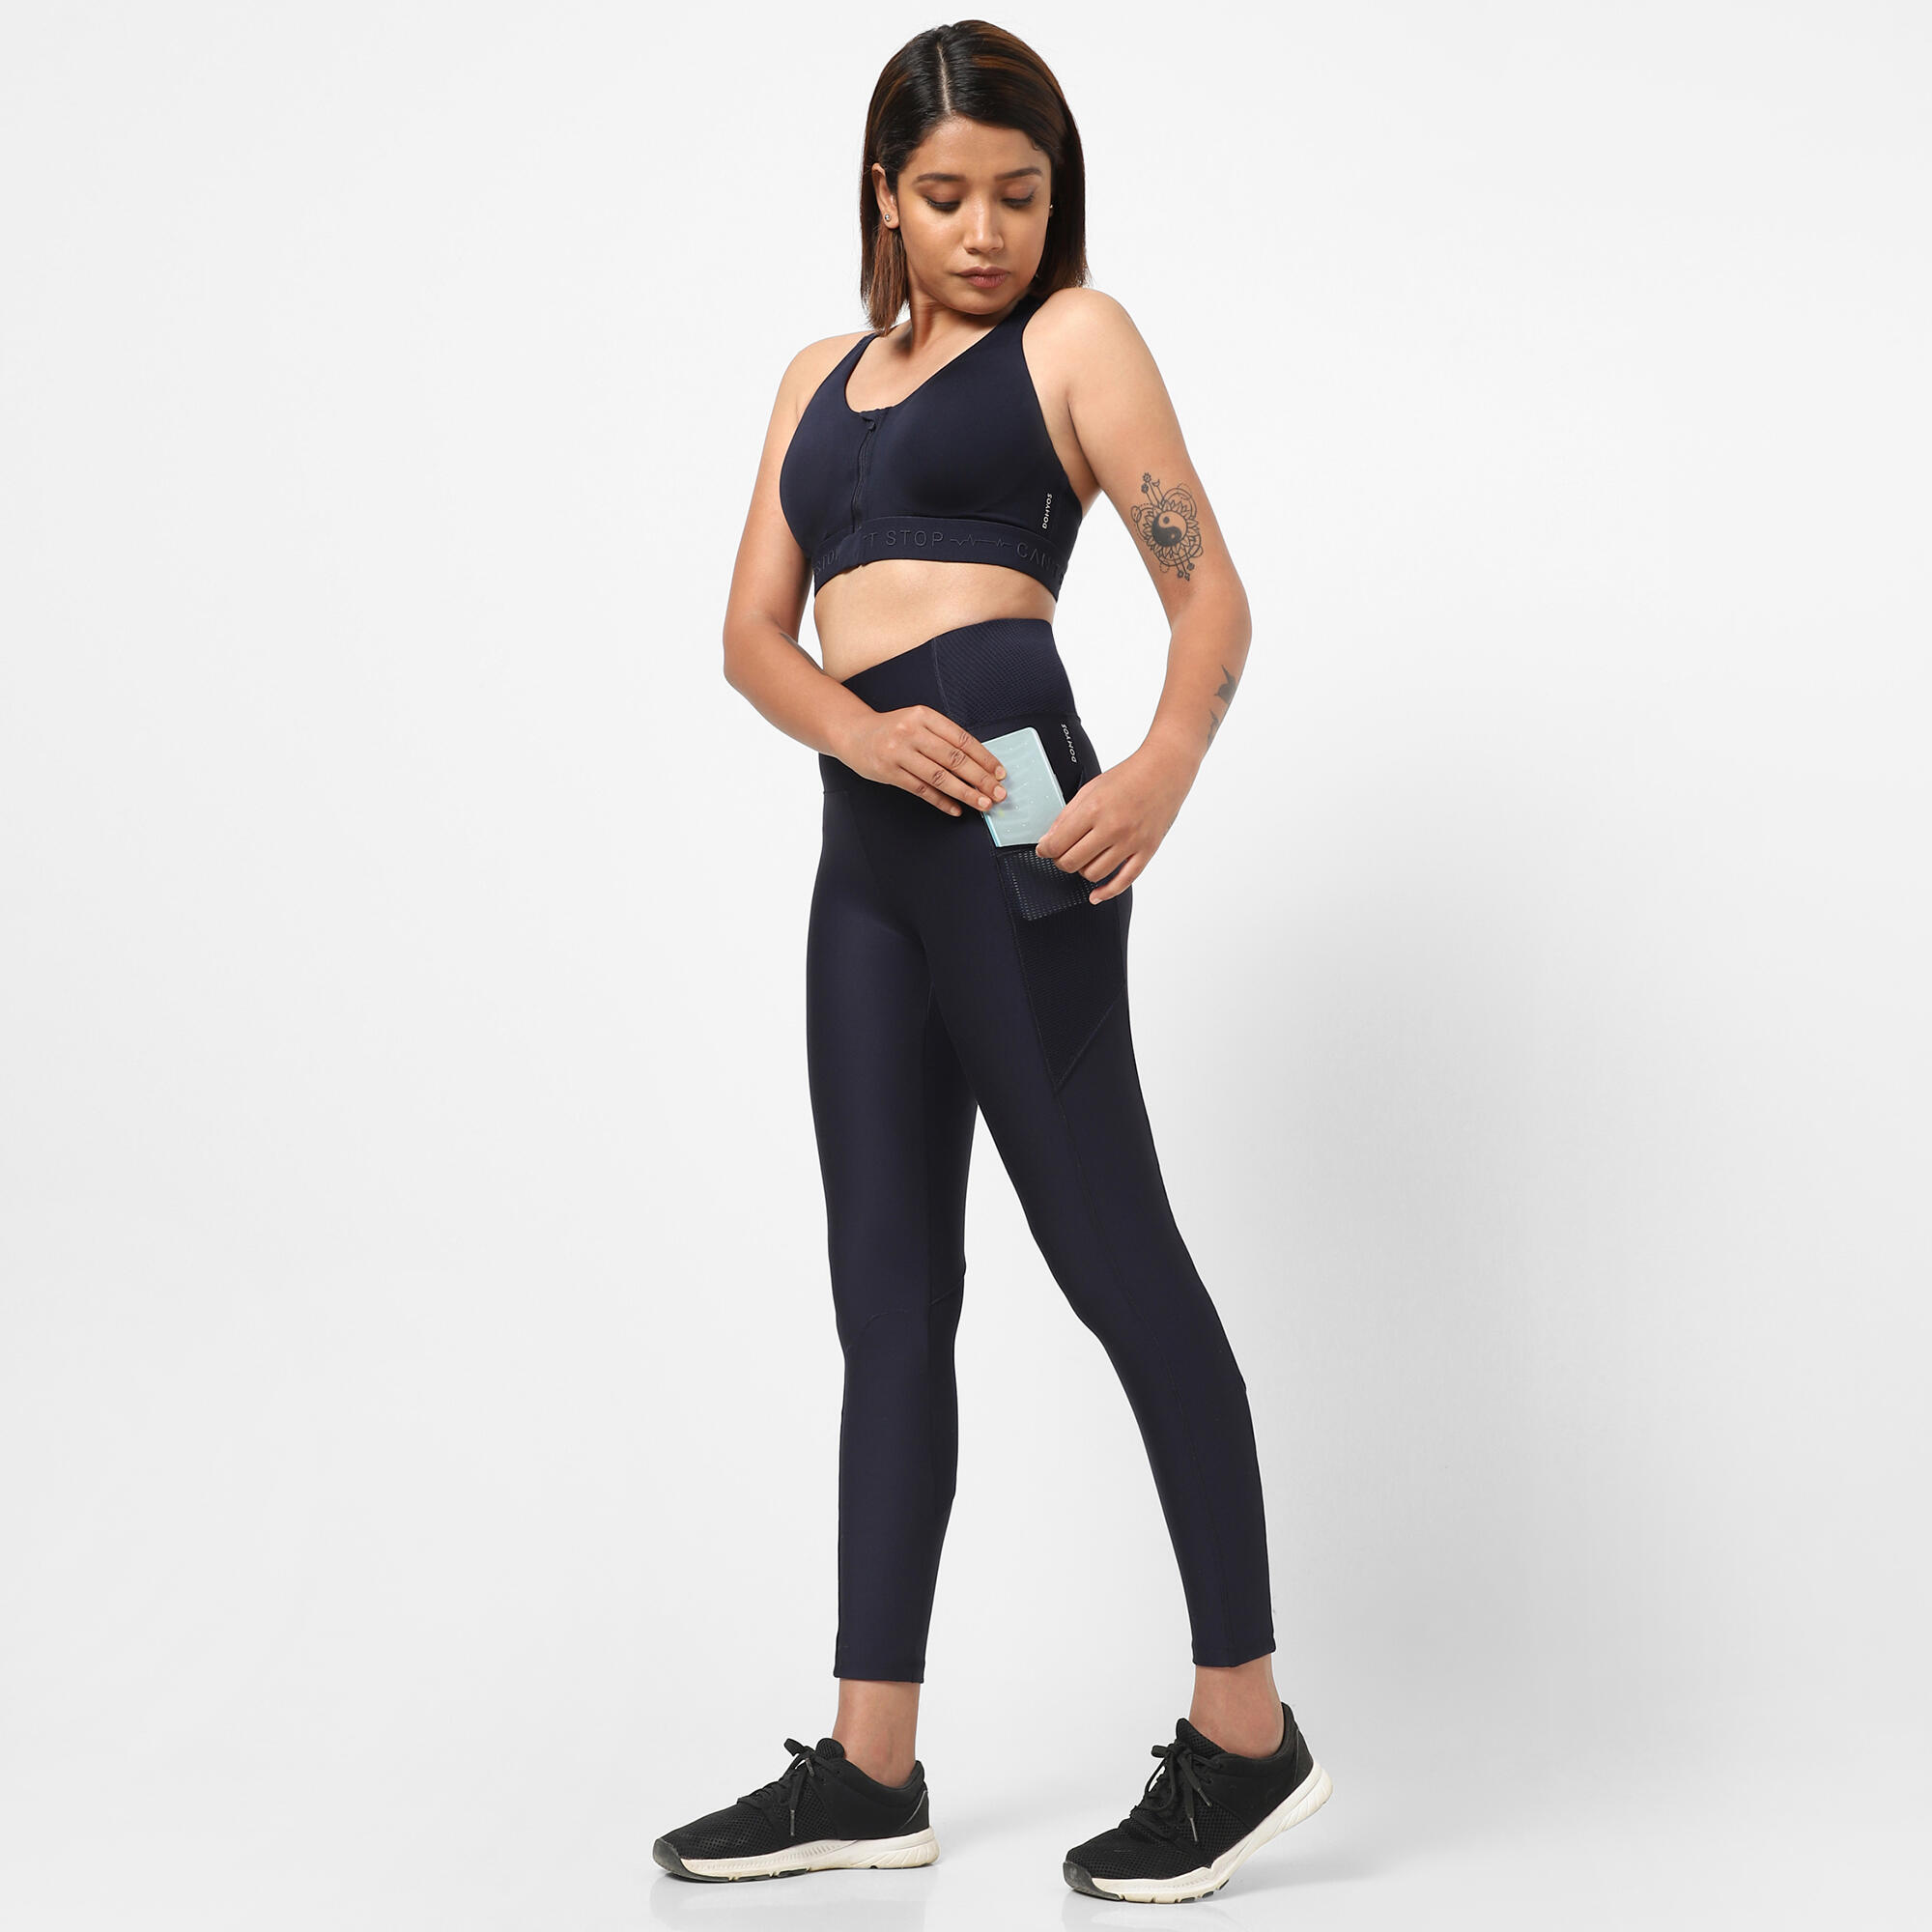 Womens Fitness Sport Yoga Set Decathlon: Bra And Pants Leggings For Gym,  Running, And Workout From Zhurongji, $19.43 | DHgate.Com